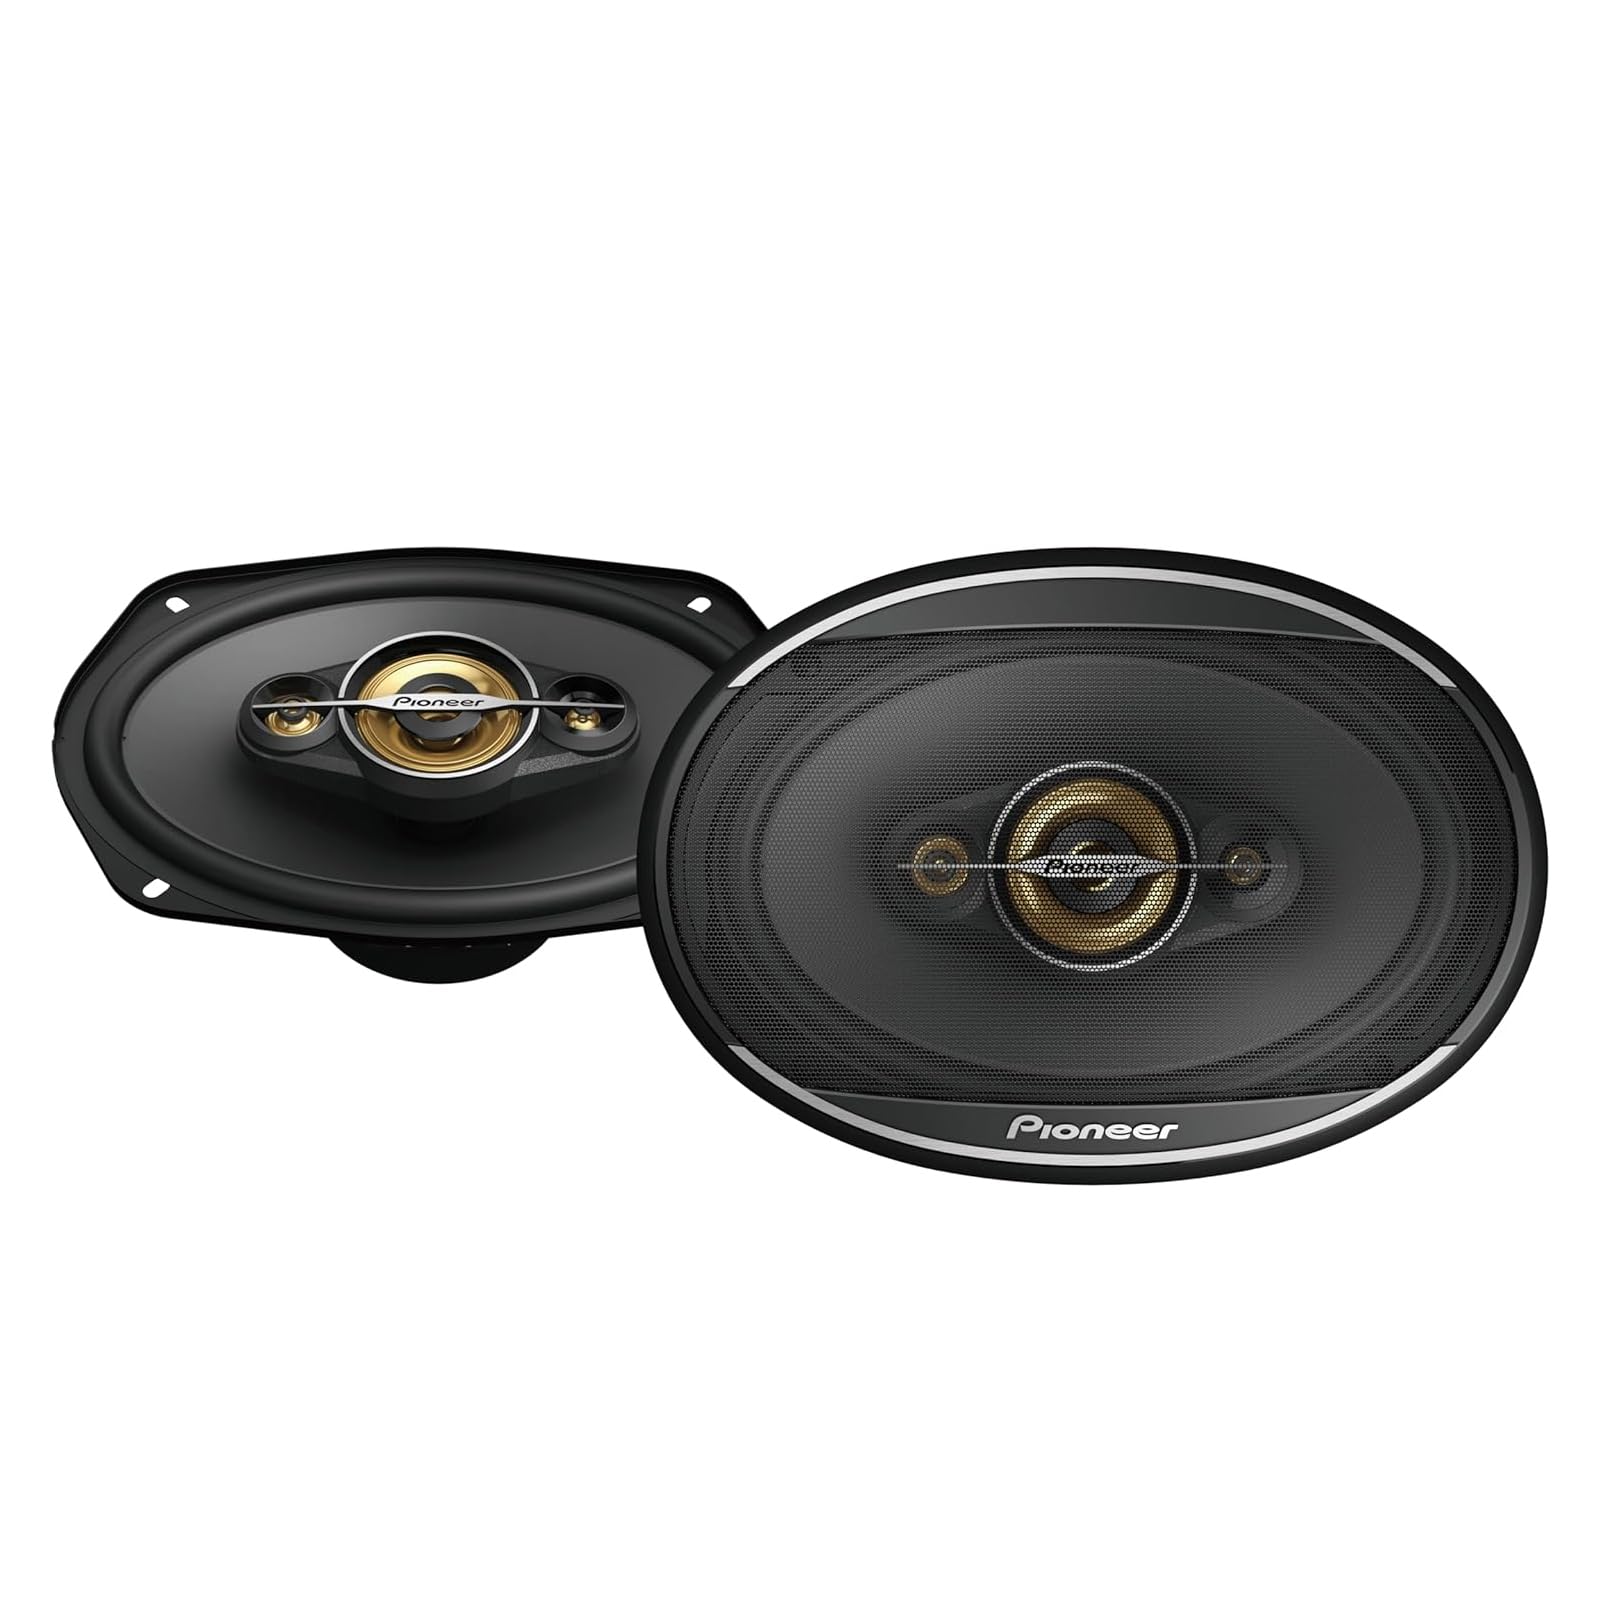 6x9 Pioneer TS-A6971F 4-Way Full-Range Coaxial Car Speakers $75.47 + Free Shipping